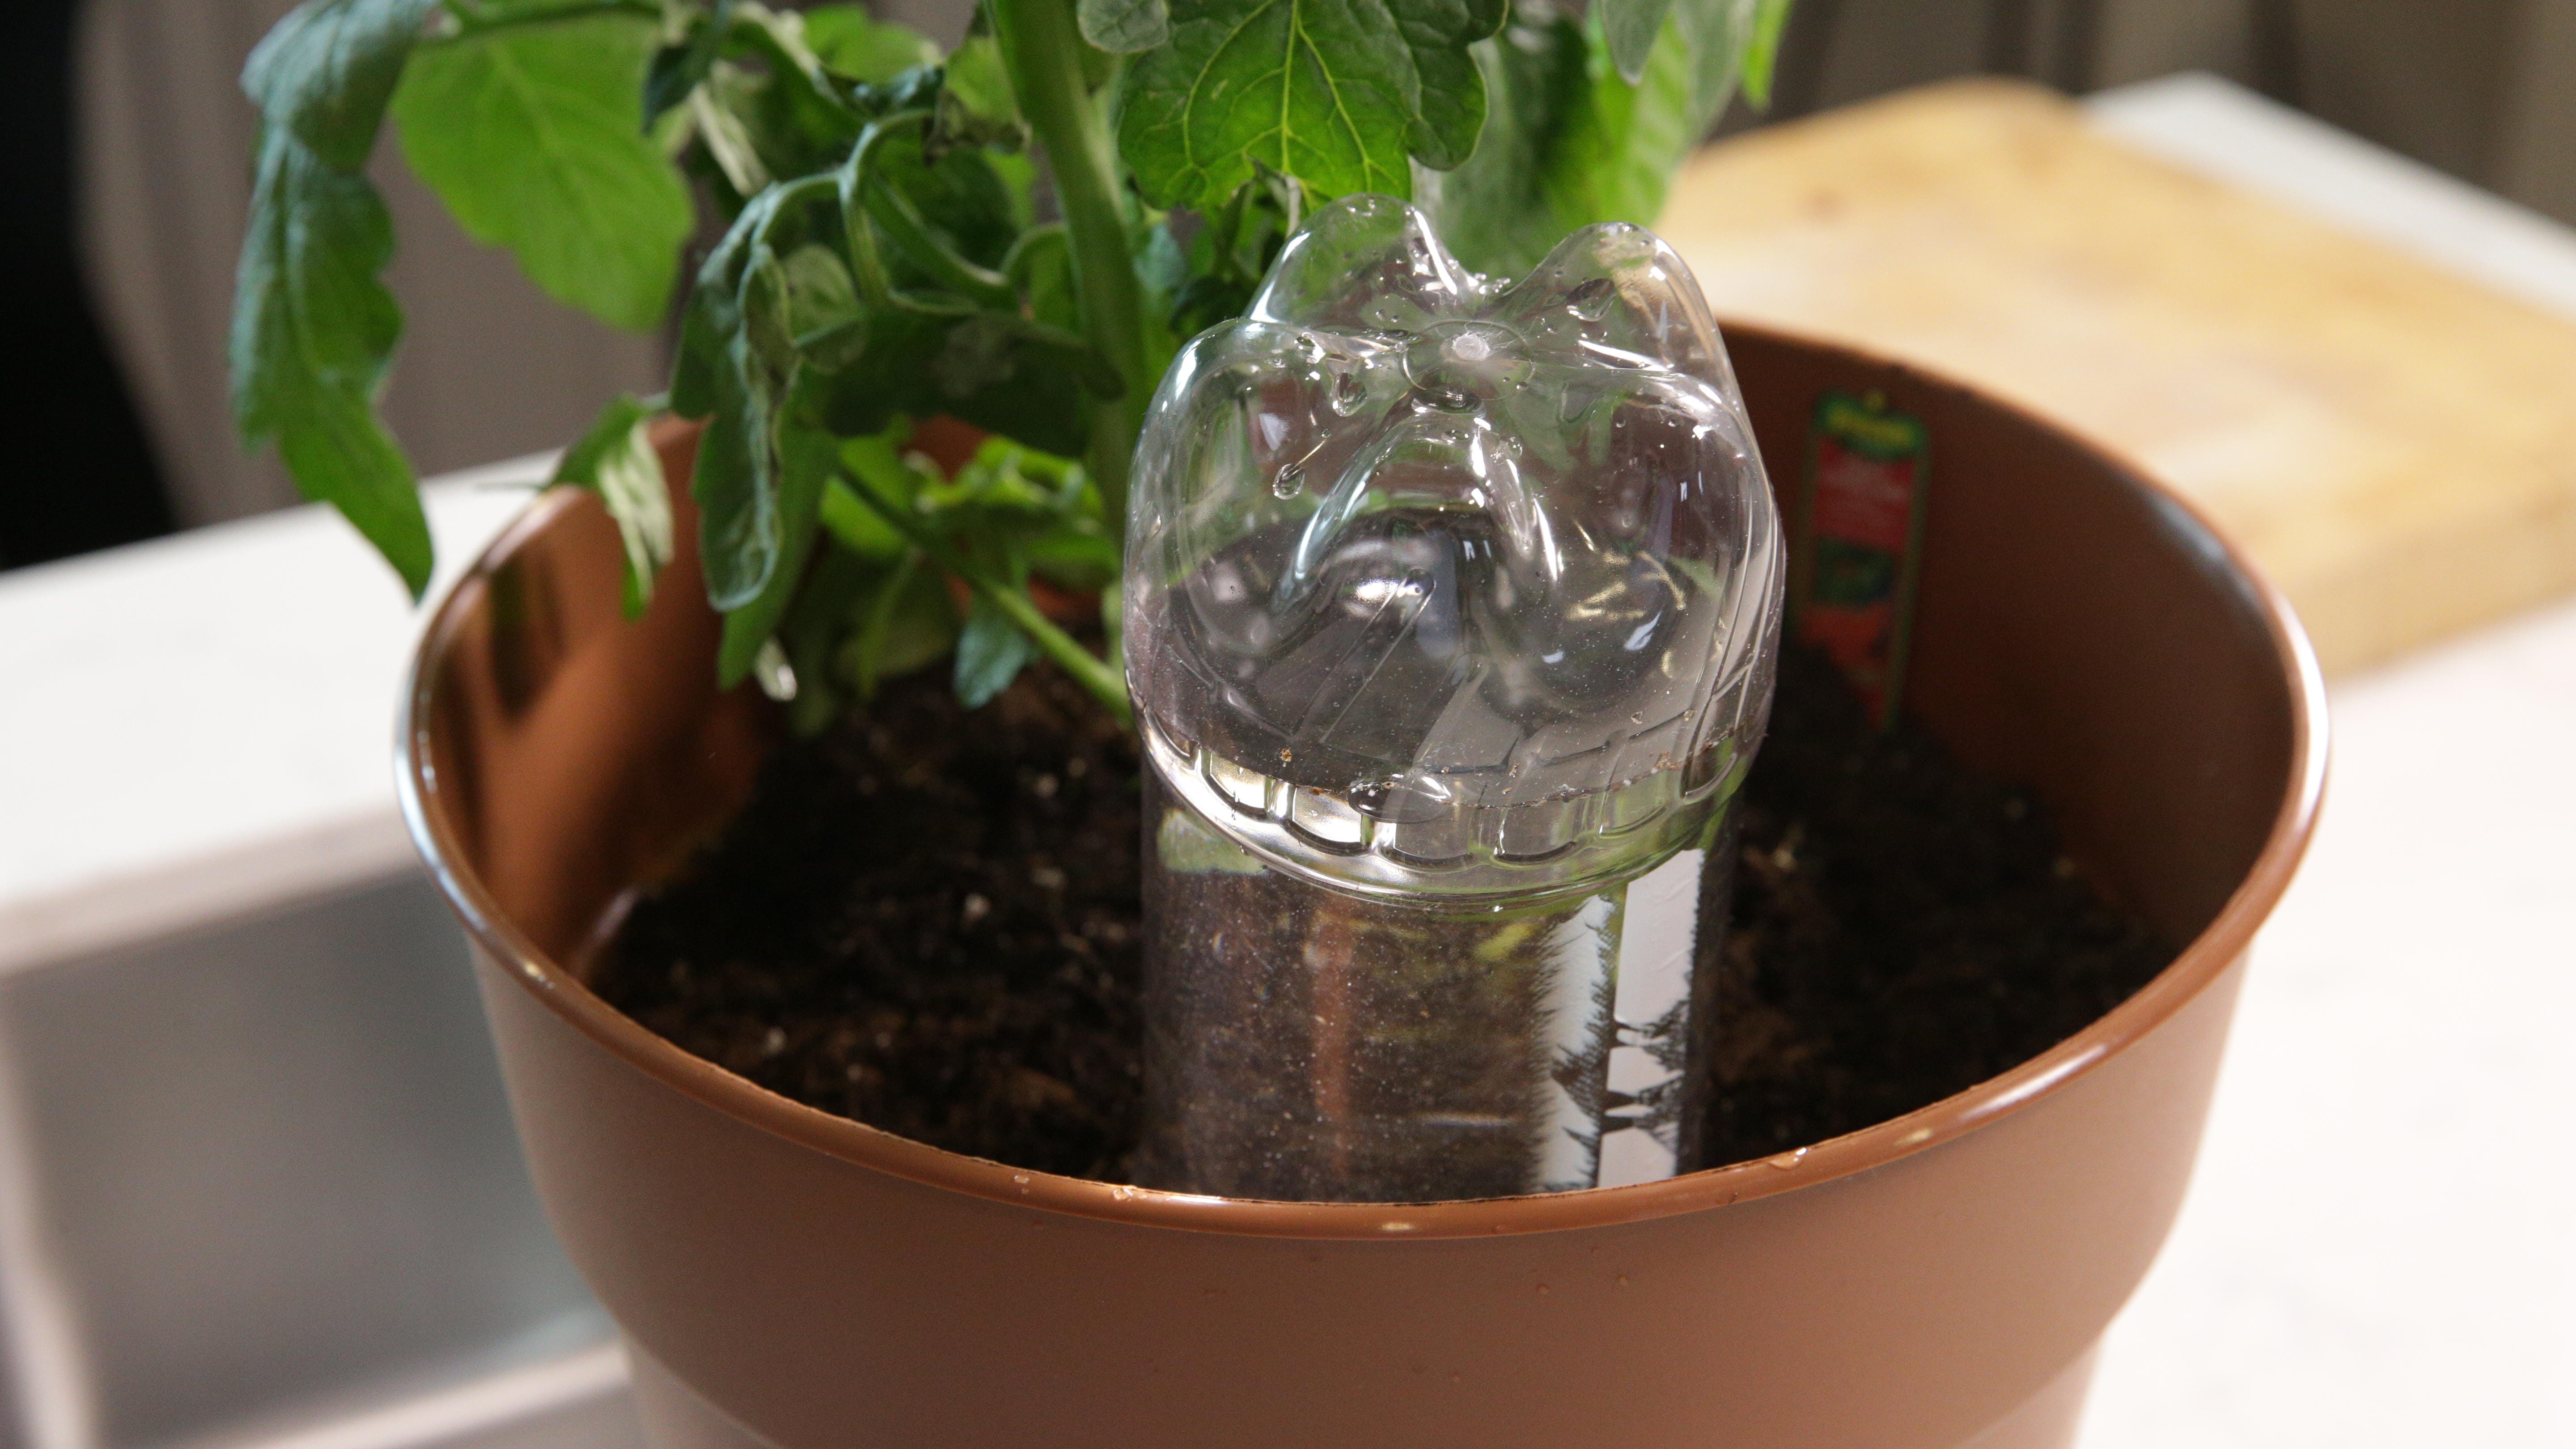 The plastic water bottle was turned upside down and stuck in the soil next to a potted plant